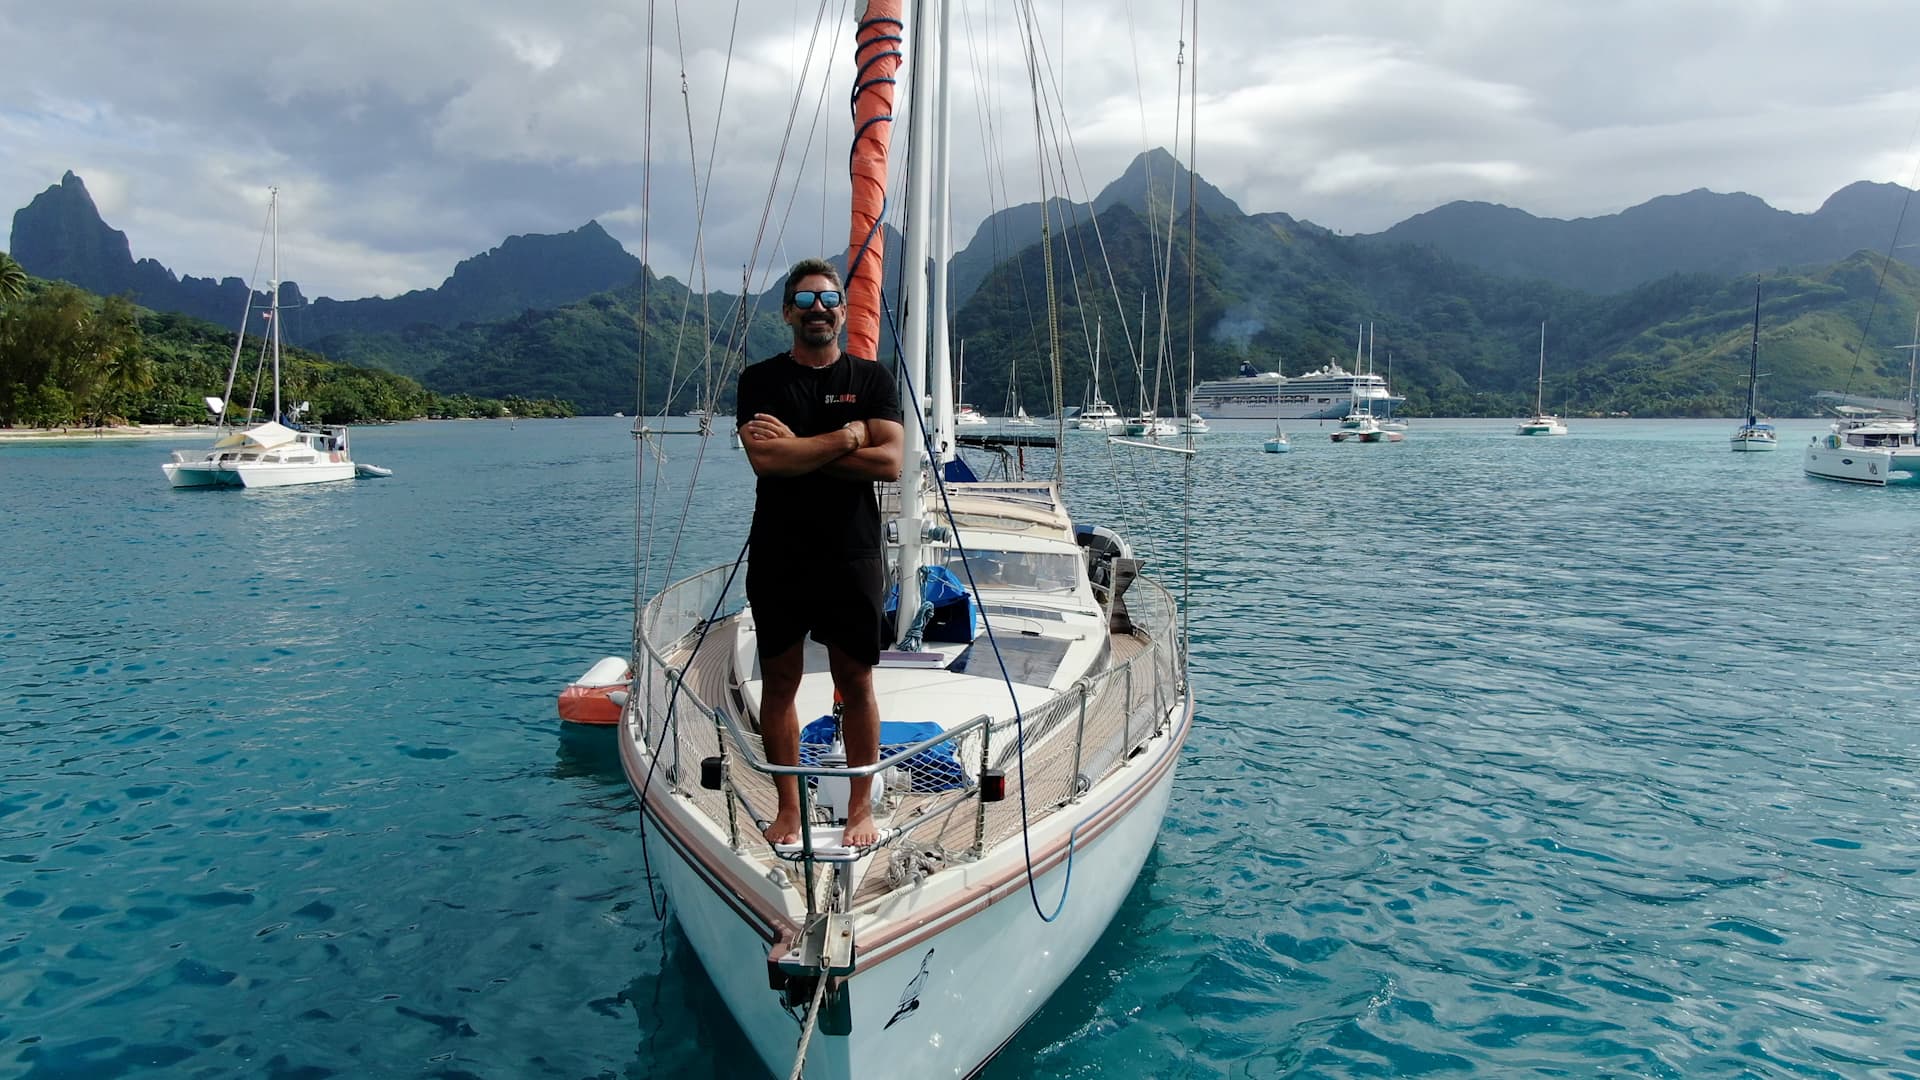 Trautman and his family are currently docked in French Polynesia.